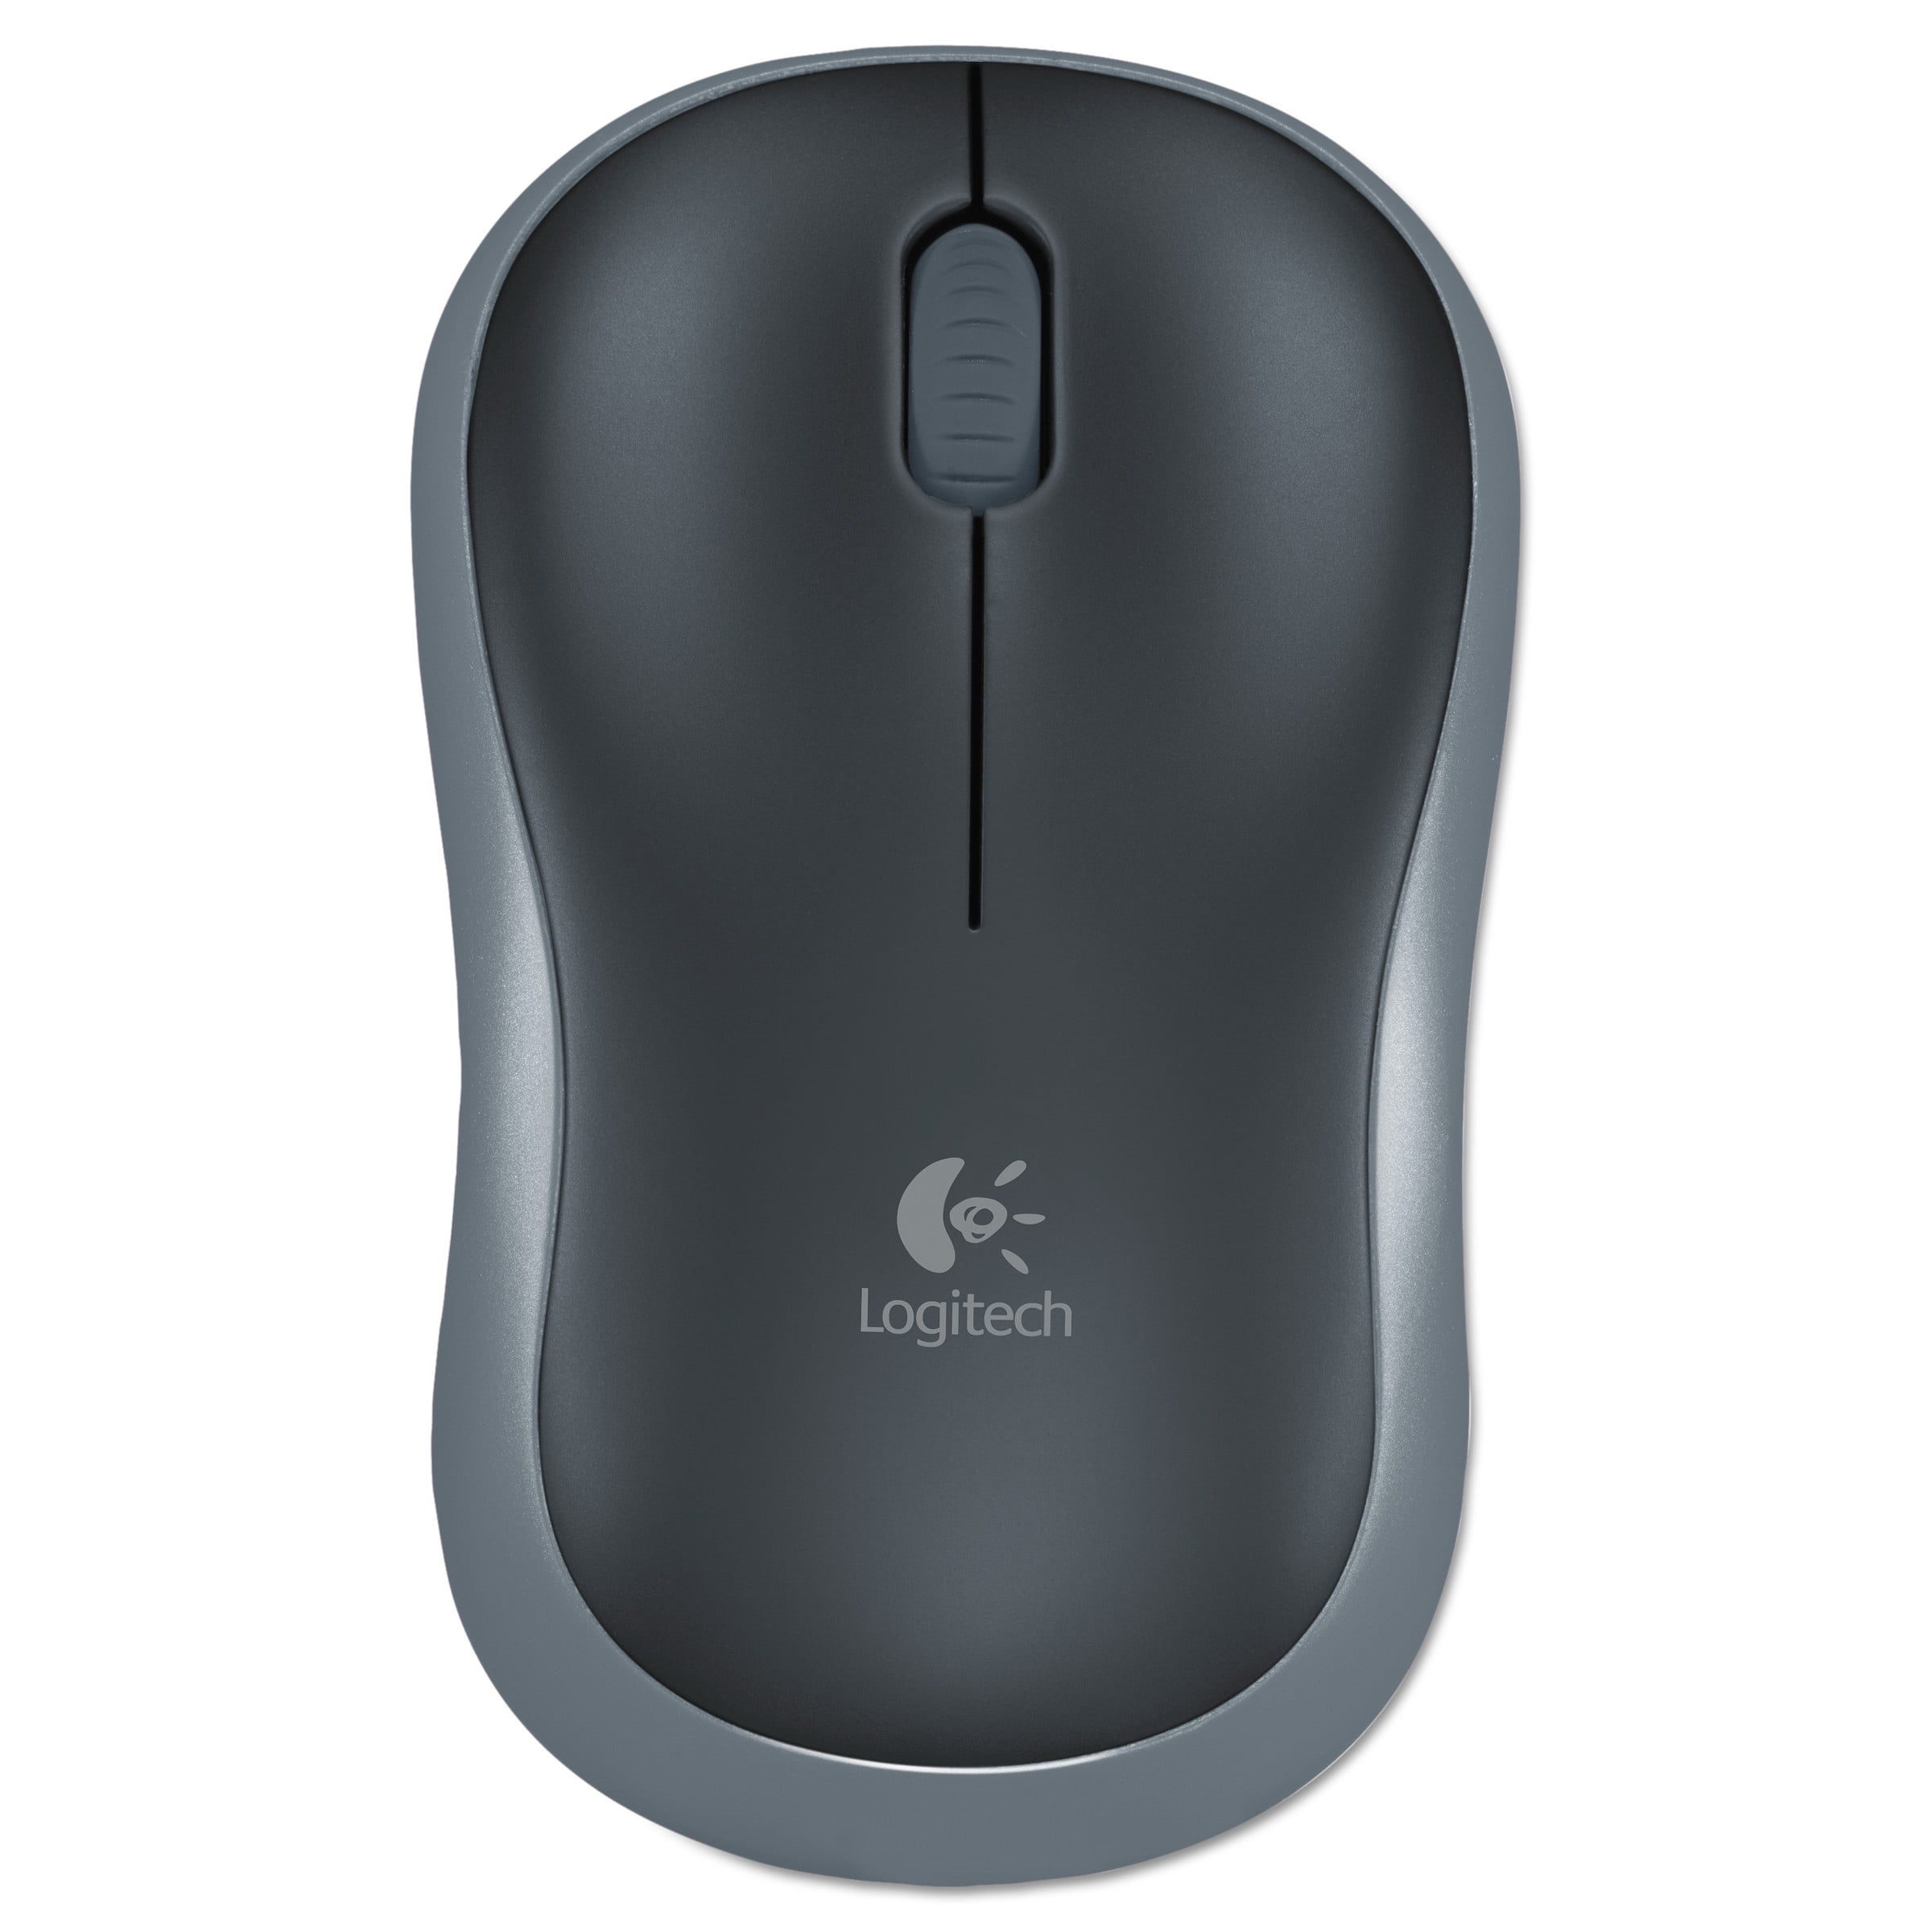 Logitech M185 Wireless Mouse, 2.4GHz with USB Mini Receiver, 12-Month  Battery Life, 1000 DPI Optical Tracking, Ambidextrous PC/Mac/Laptop - Swift  Gray